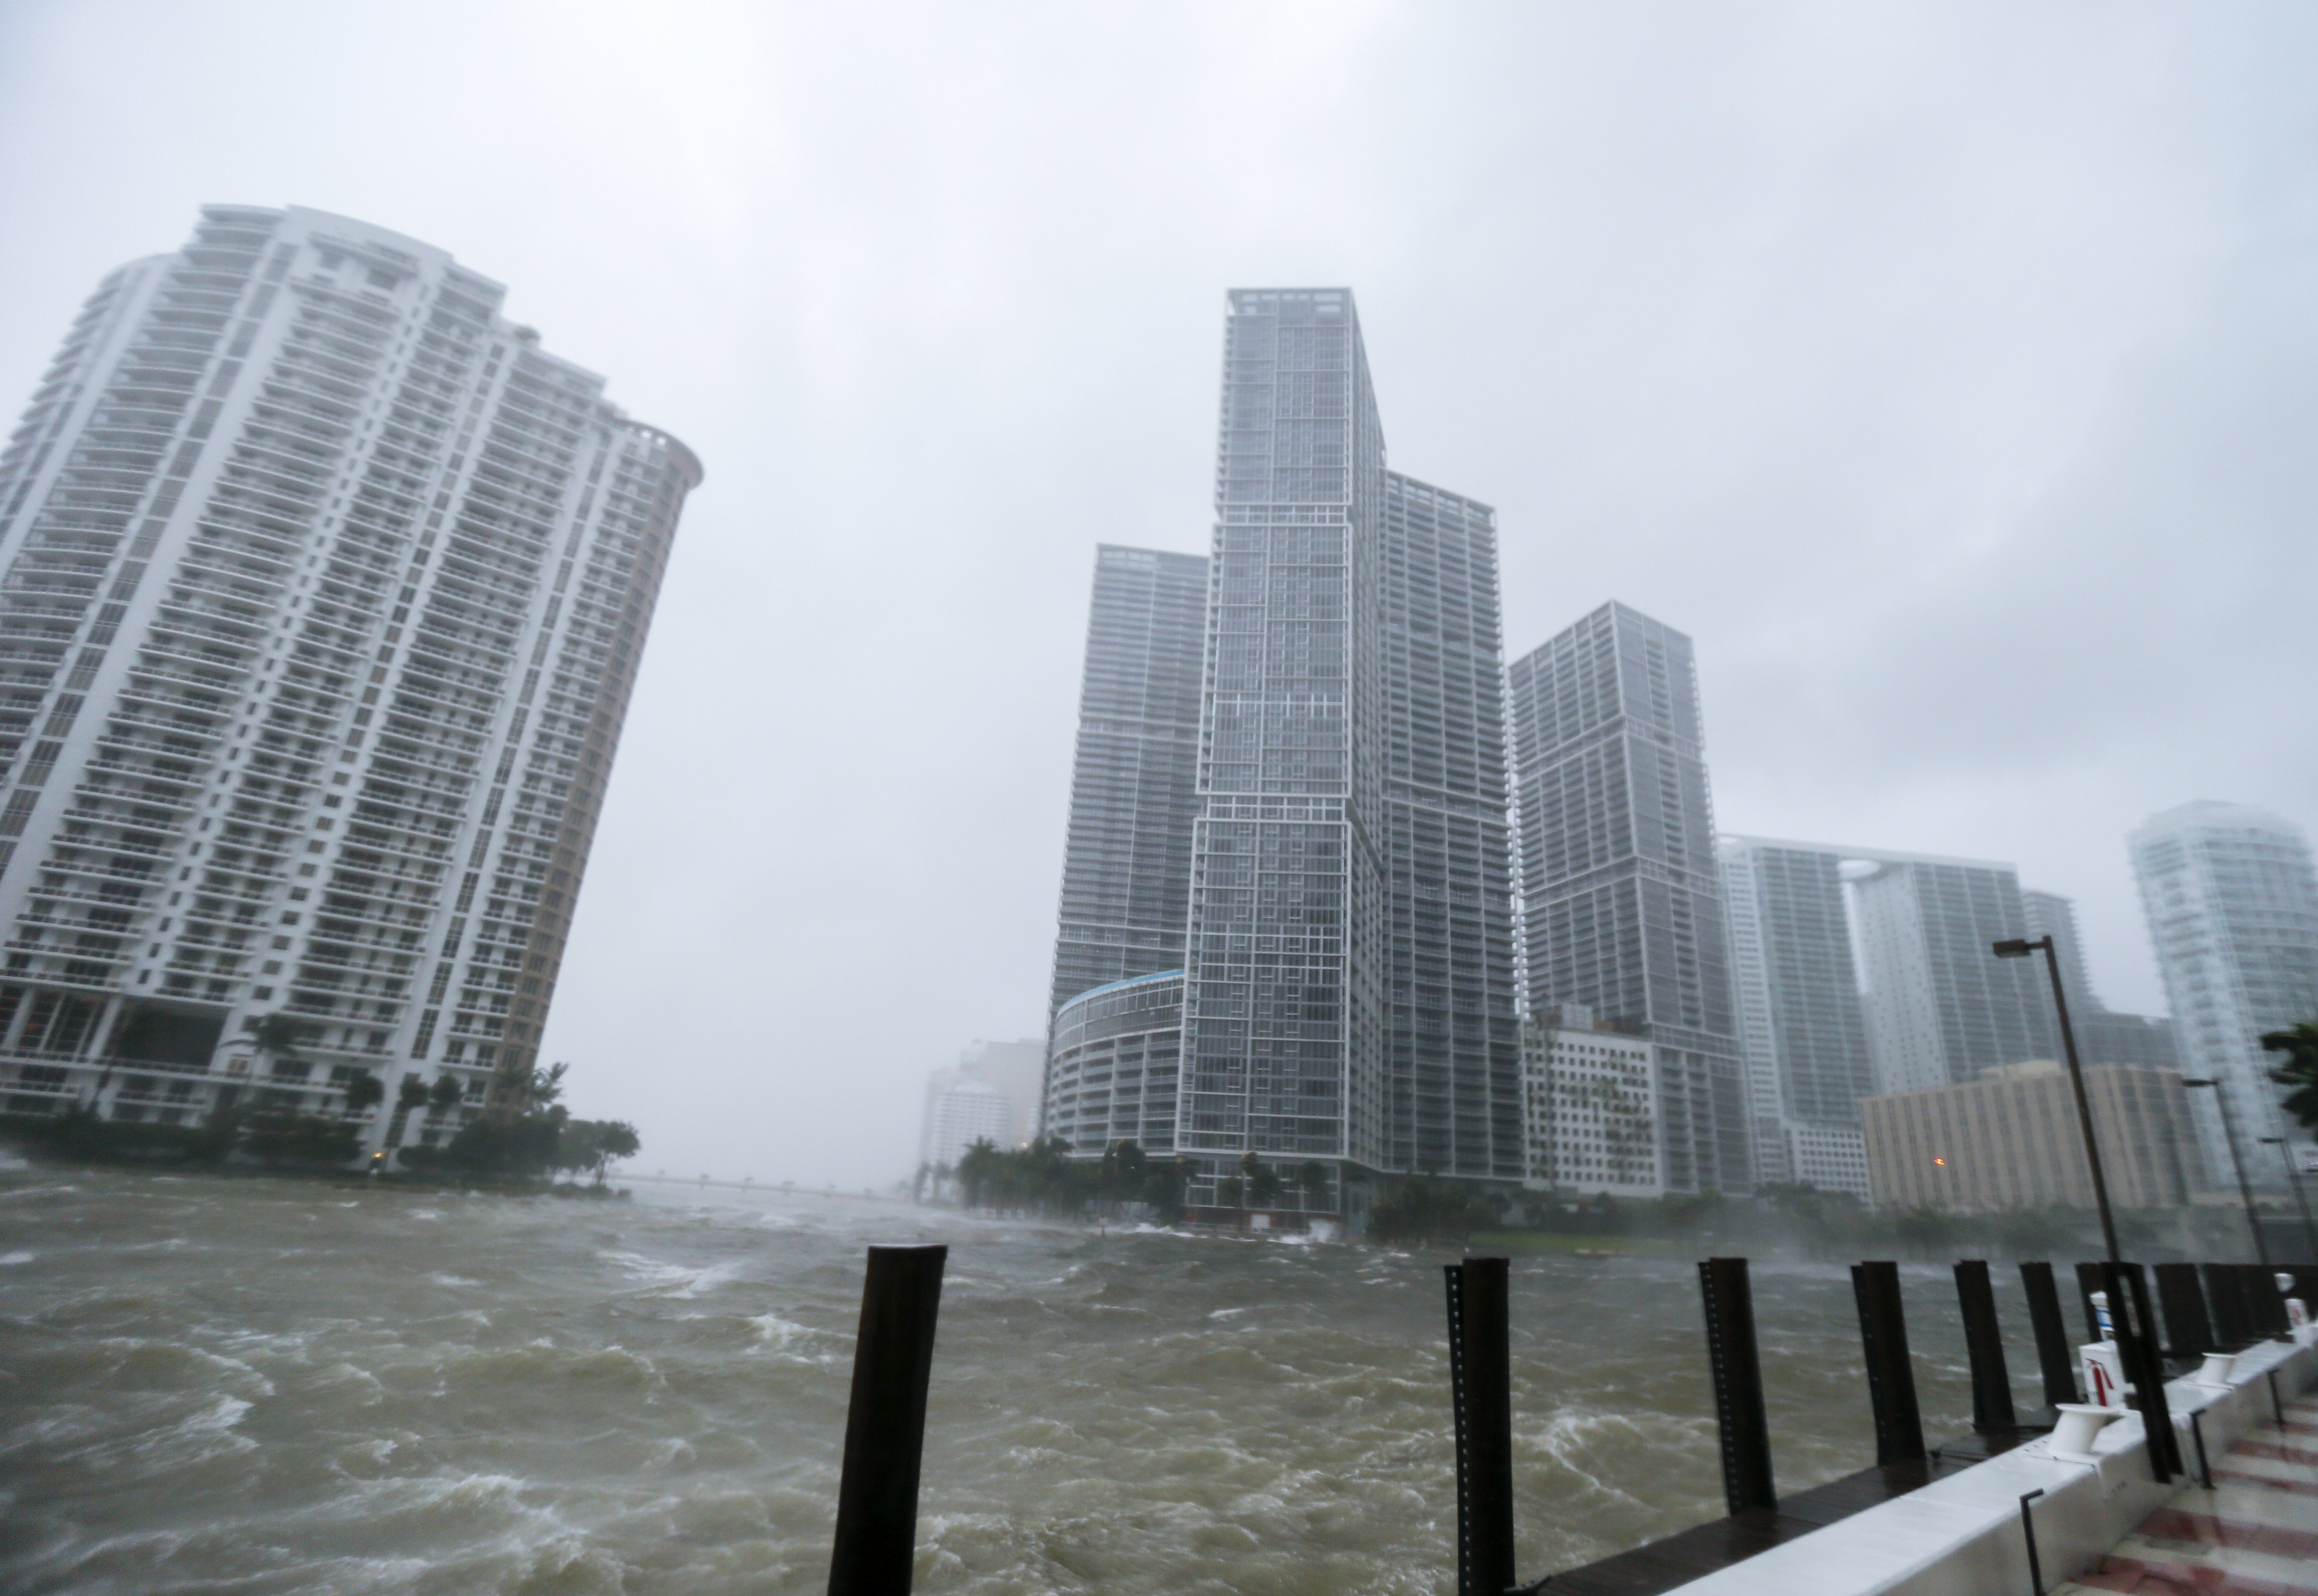 2017-09-10 06:21:54 epa06196067 The rough waters where the Miami River meets Biscayne Bay shows the full effects of Hurricane Irma strike in Miami, Florida, USA, 10 September 2017. Many areas are under mandatory evacuation orders as Irma approaches Florida. The National Hurricane Center has rated Irma as a Category 4 storm as the eye crosses the lower Florida Keys. EPA/ERIK S. LESSER